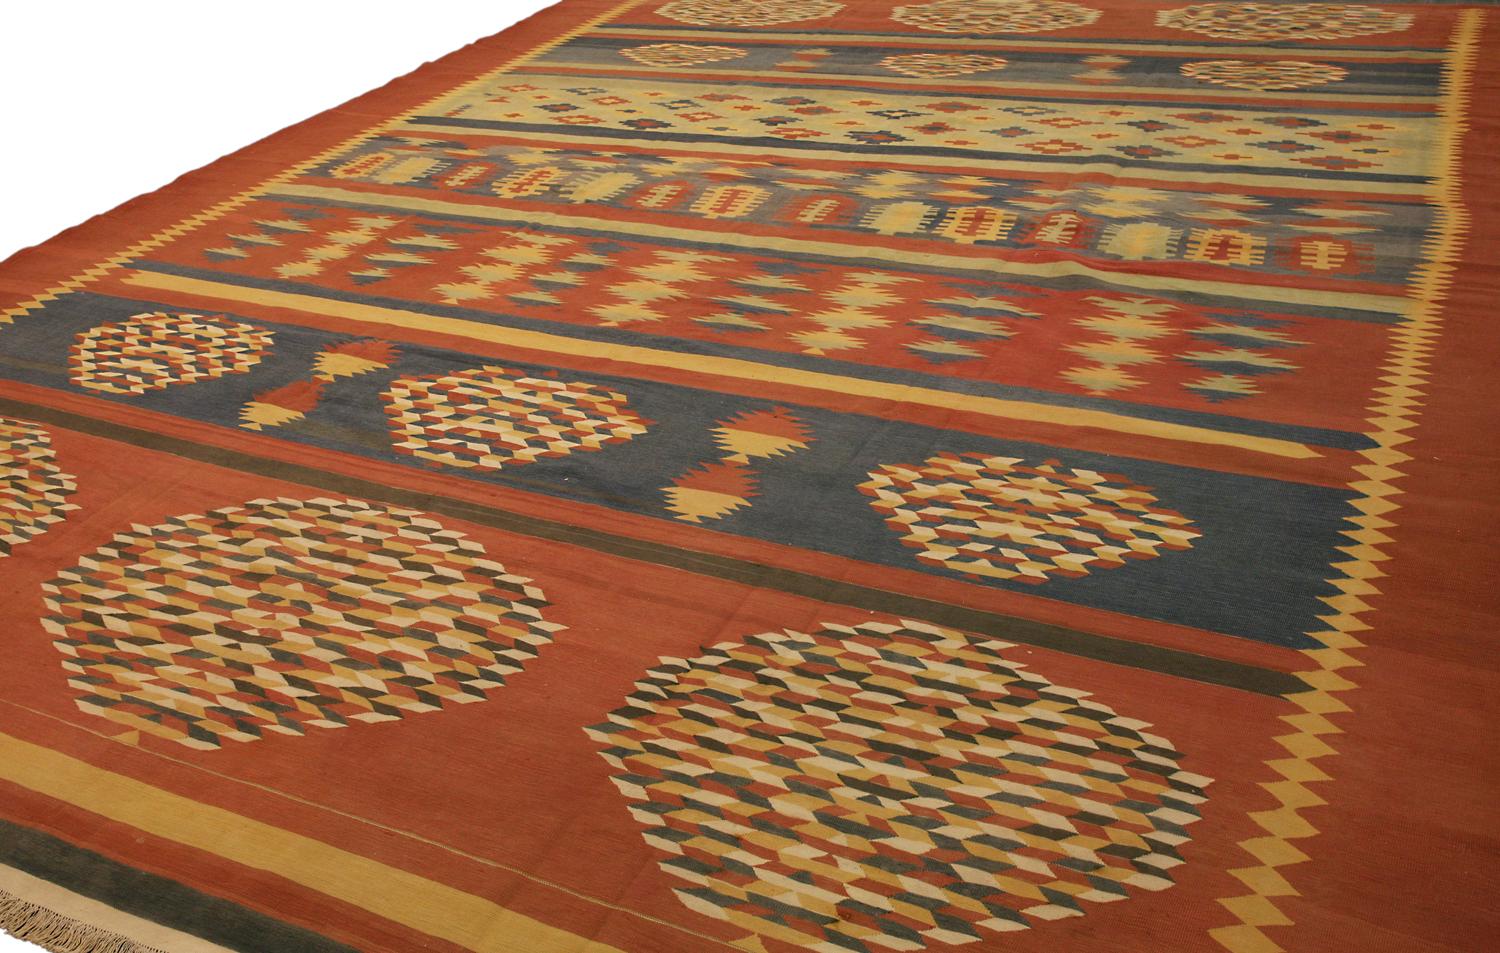 This is an antique Indian Dhurrie kilim woven during the first quarter of the 20th century circa 1920s and measures 455 x 337 CM in size. This kilim has an all-over geometric design with seven rows of alternating motifs. The colors used to create